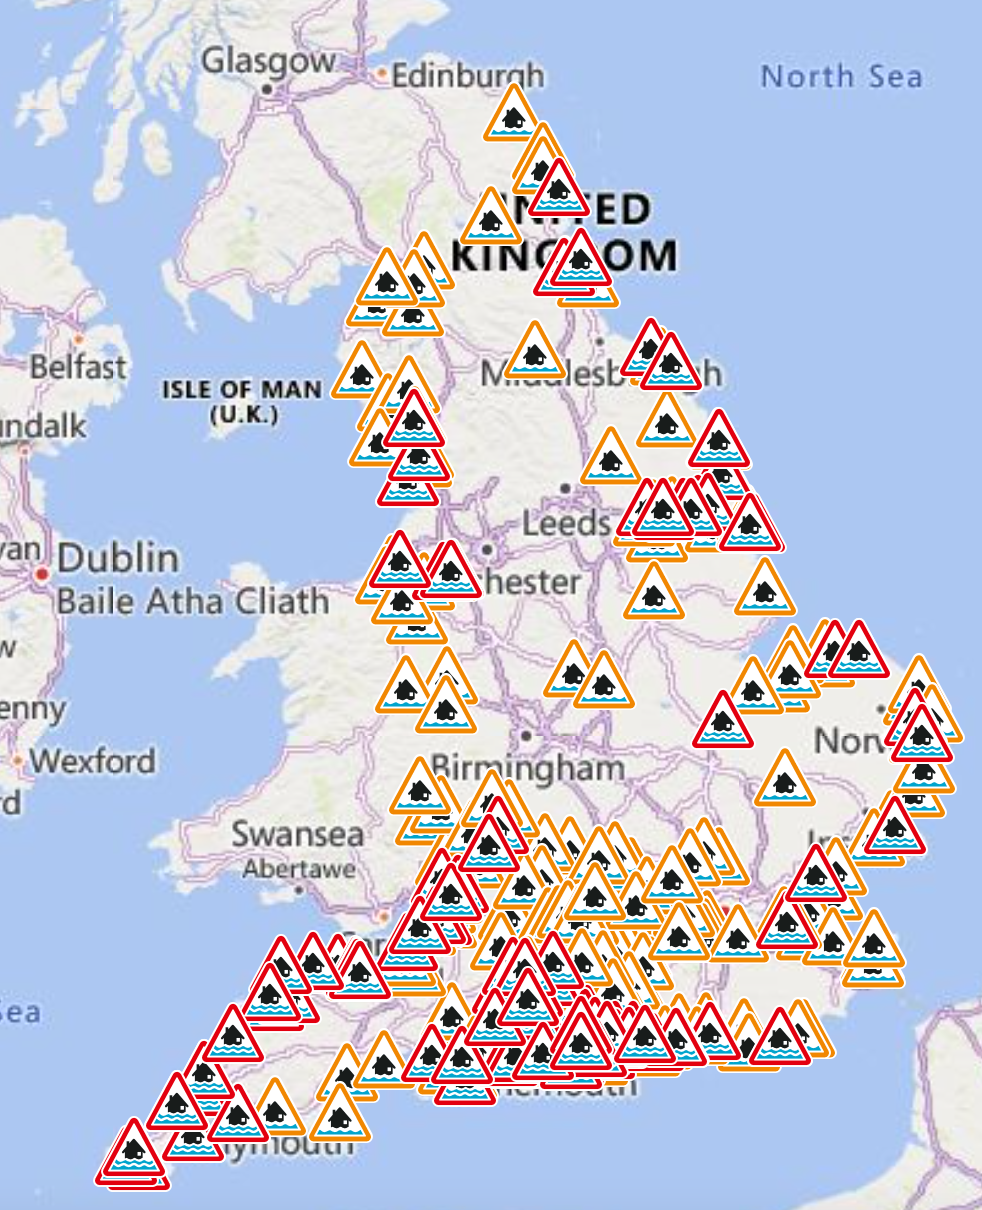 Hundreds of locations across England have been warned to brace for possible flooding